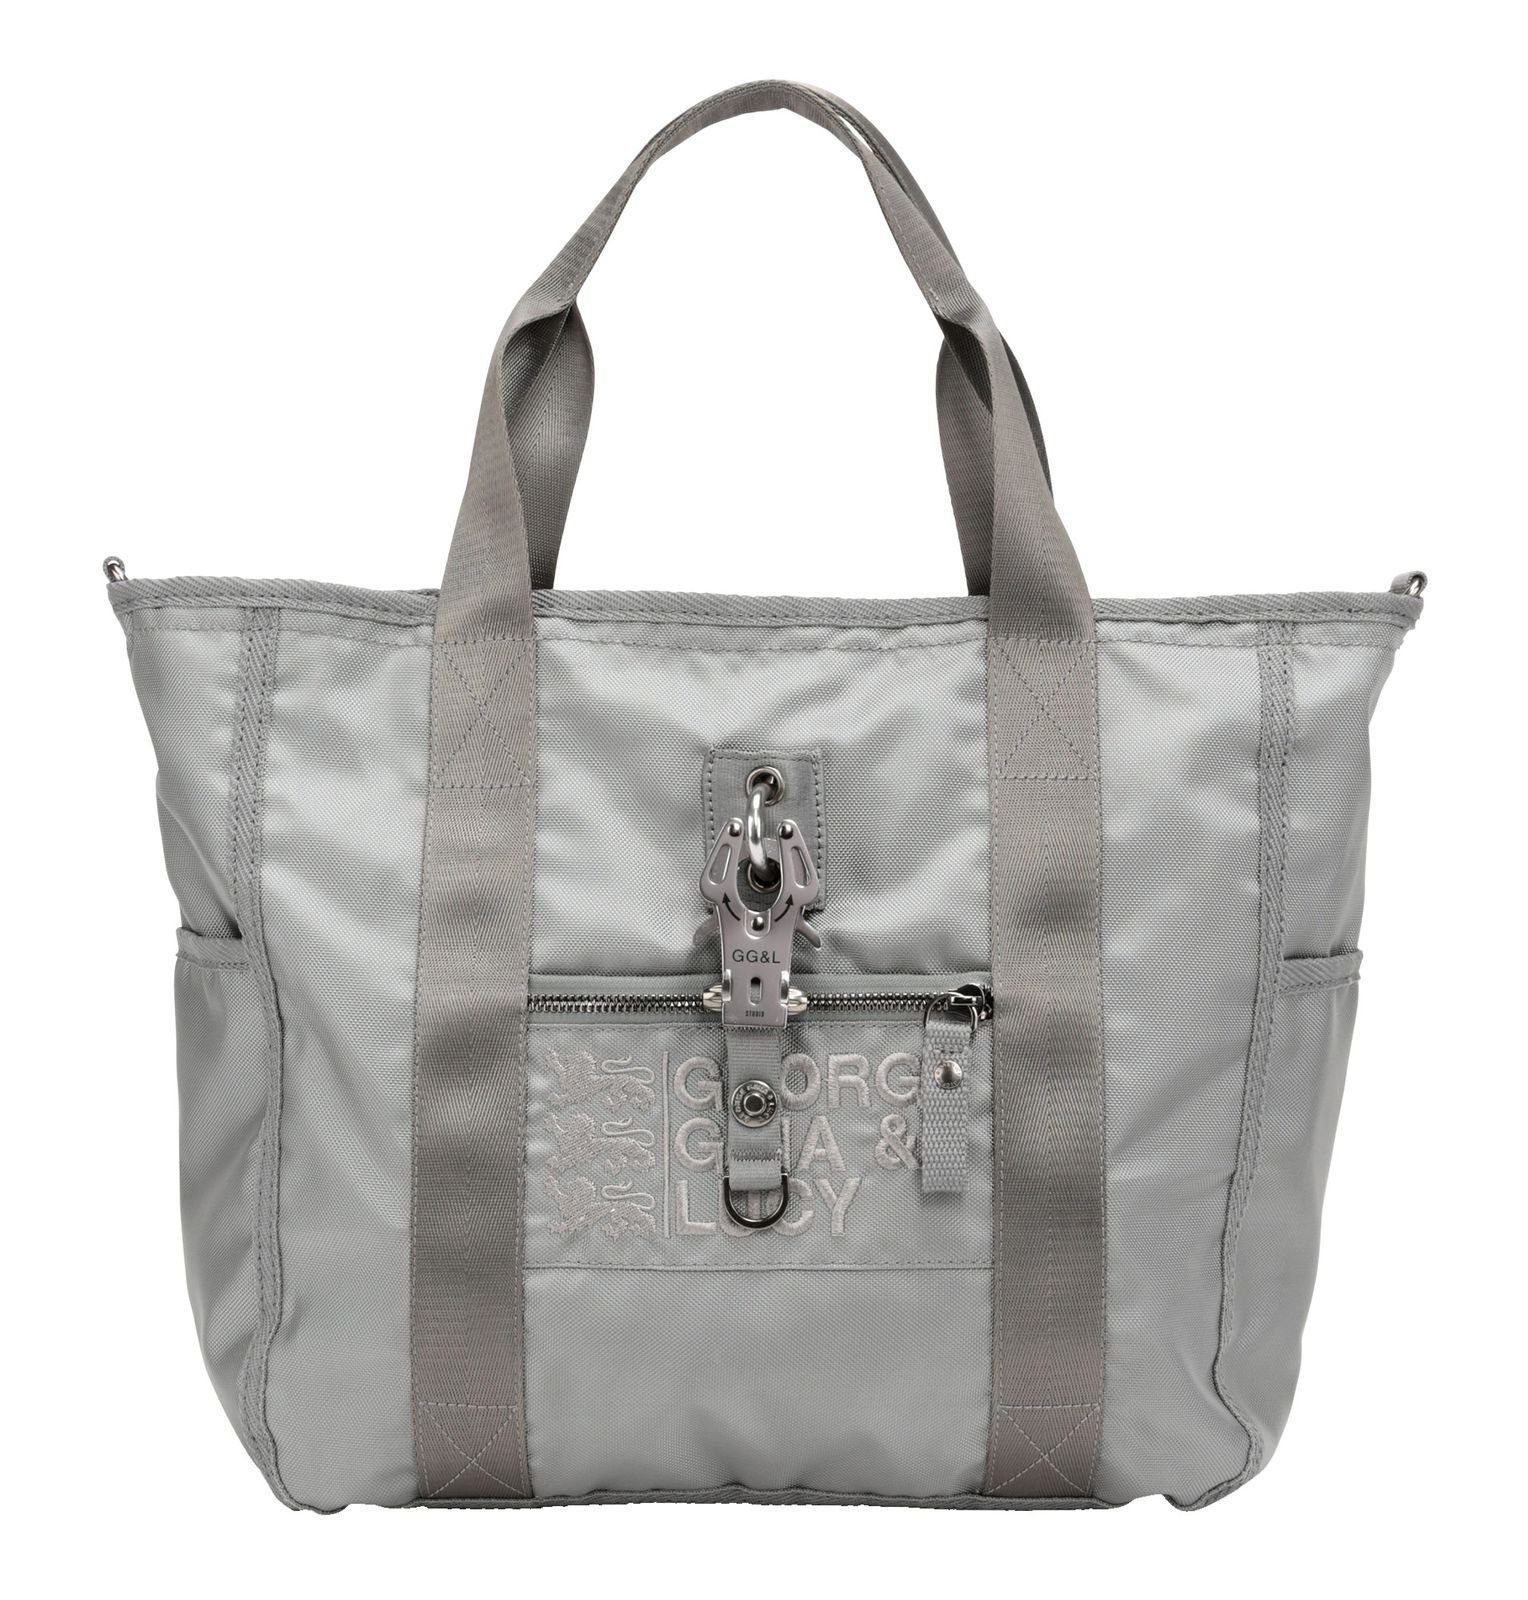 George Gina & Lucy Schultertasche Basic Nylon Stoned